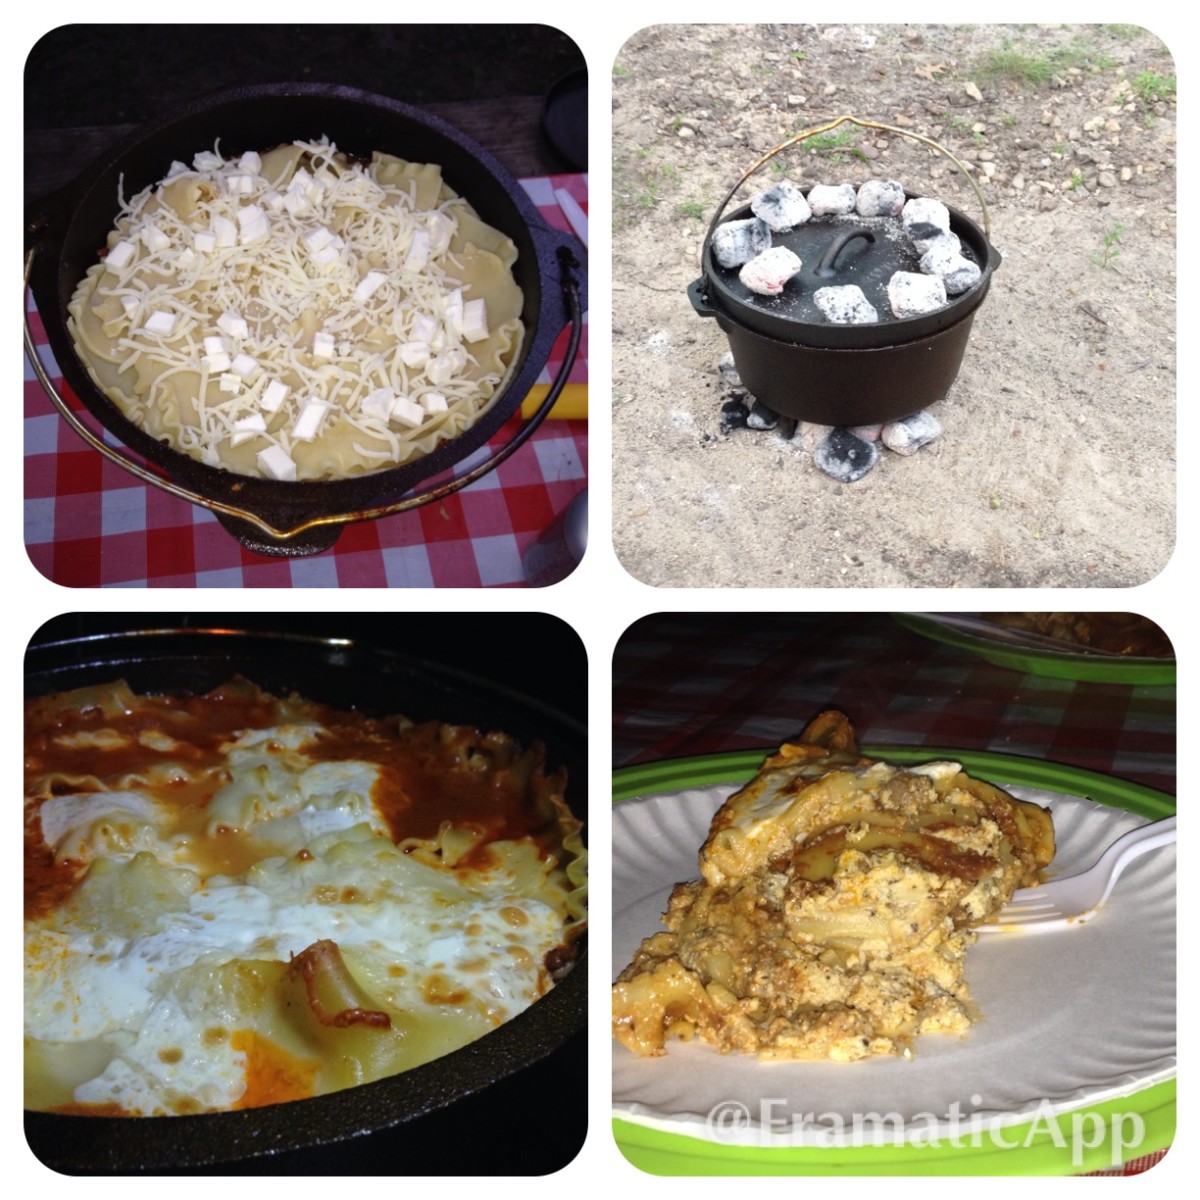 Pioneer Lasagna: Cooking Lasagna in a Dutch Oven While Camping